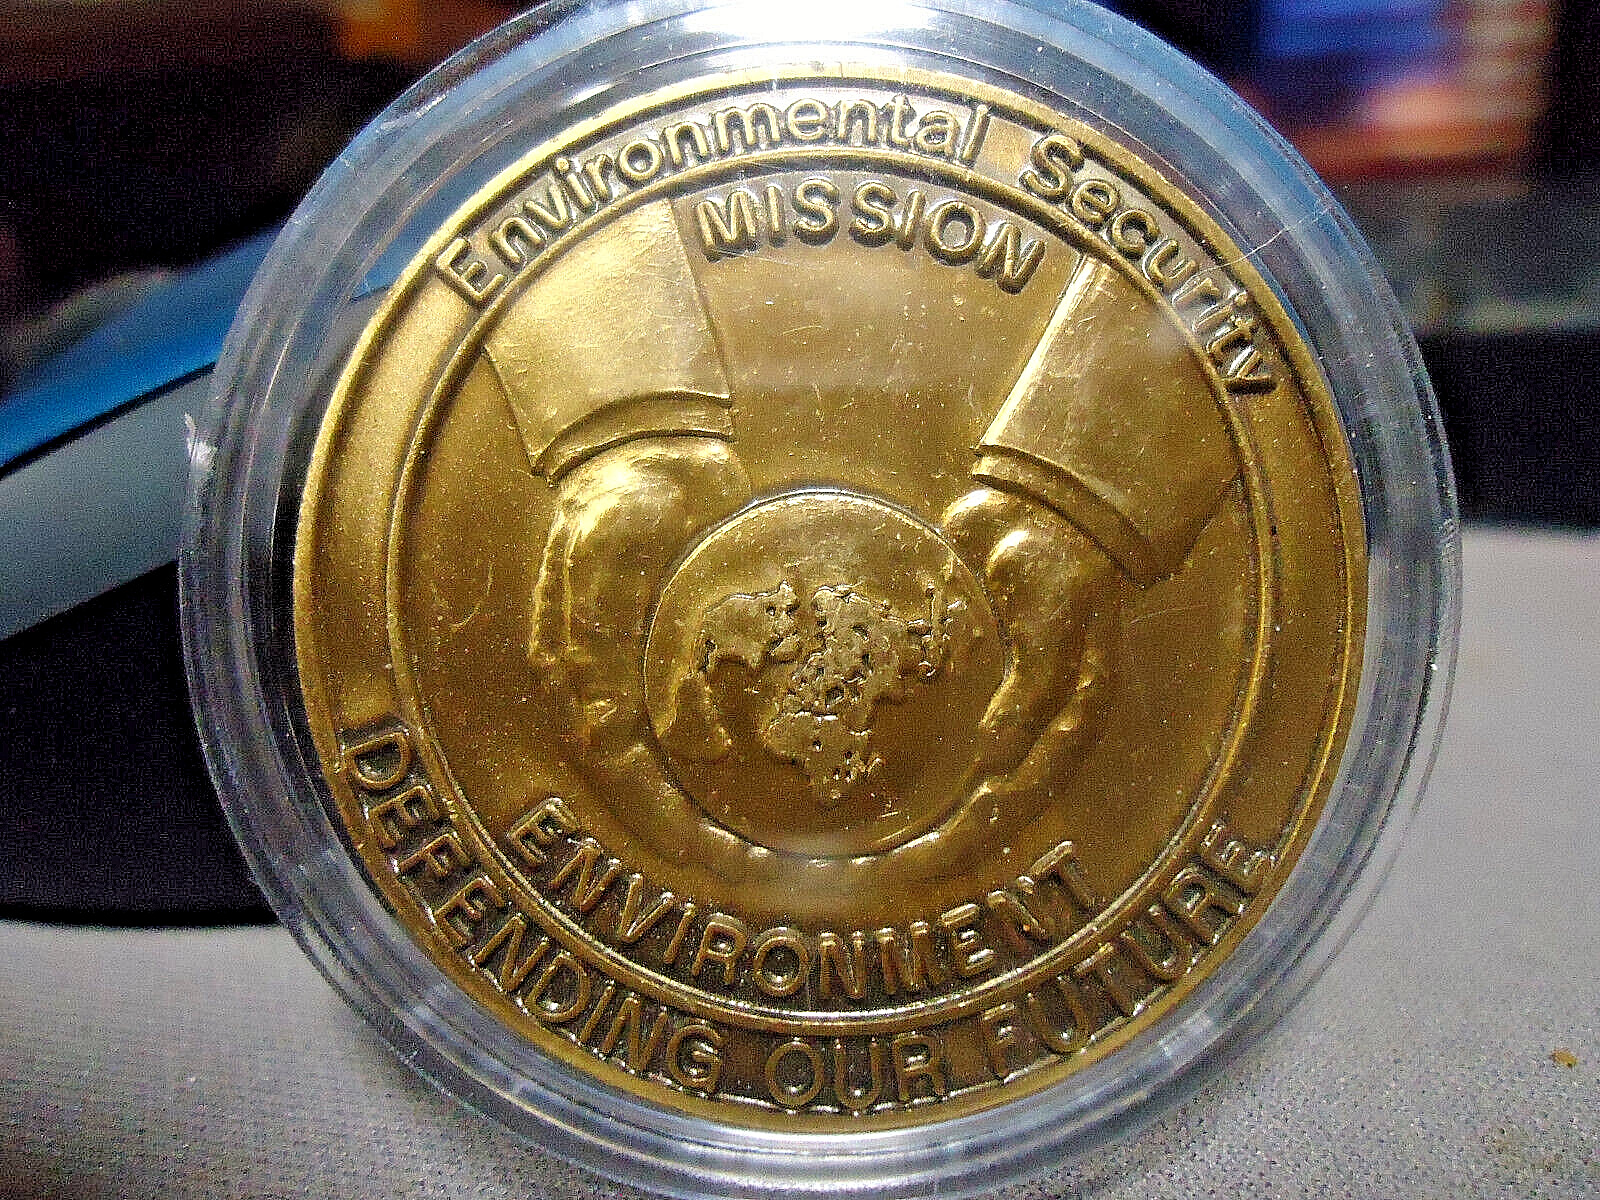 Deputy Under Sec. of Defense  Environment  Security  MISSION ENVIORMENT COIN